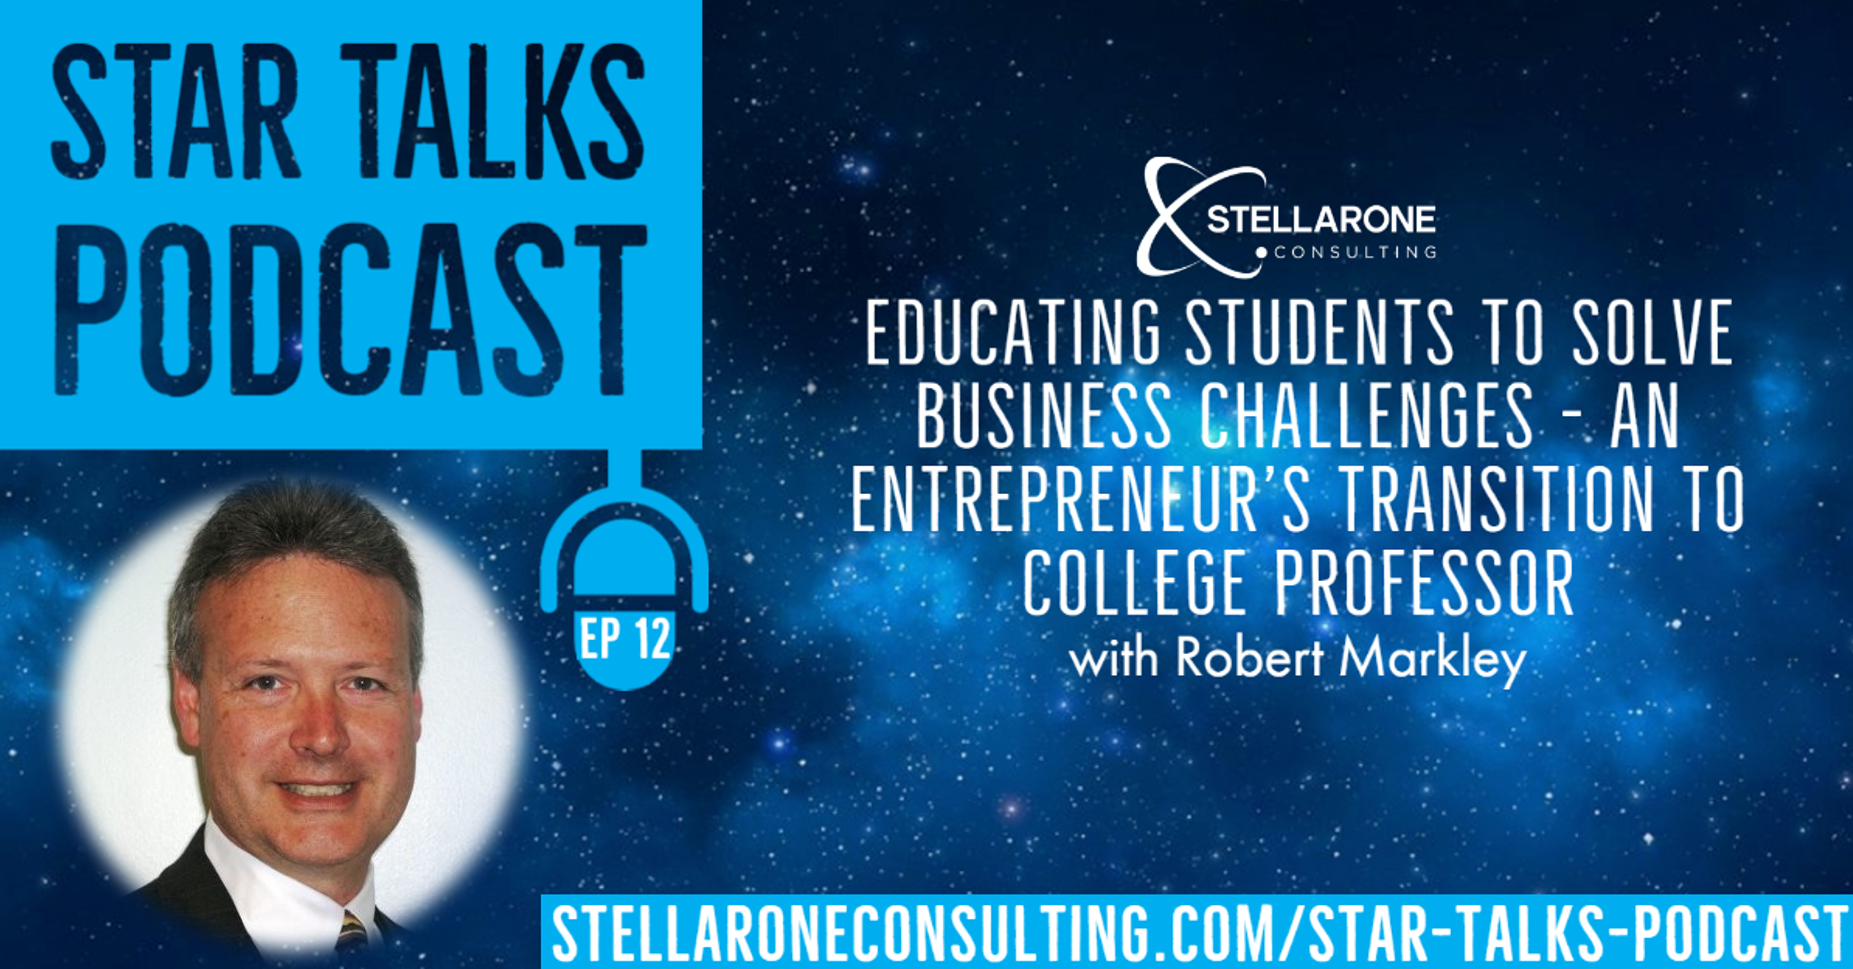 Saint Vincent College Professor on Star Talks Podcast by Stellar One Consulting